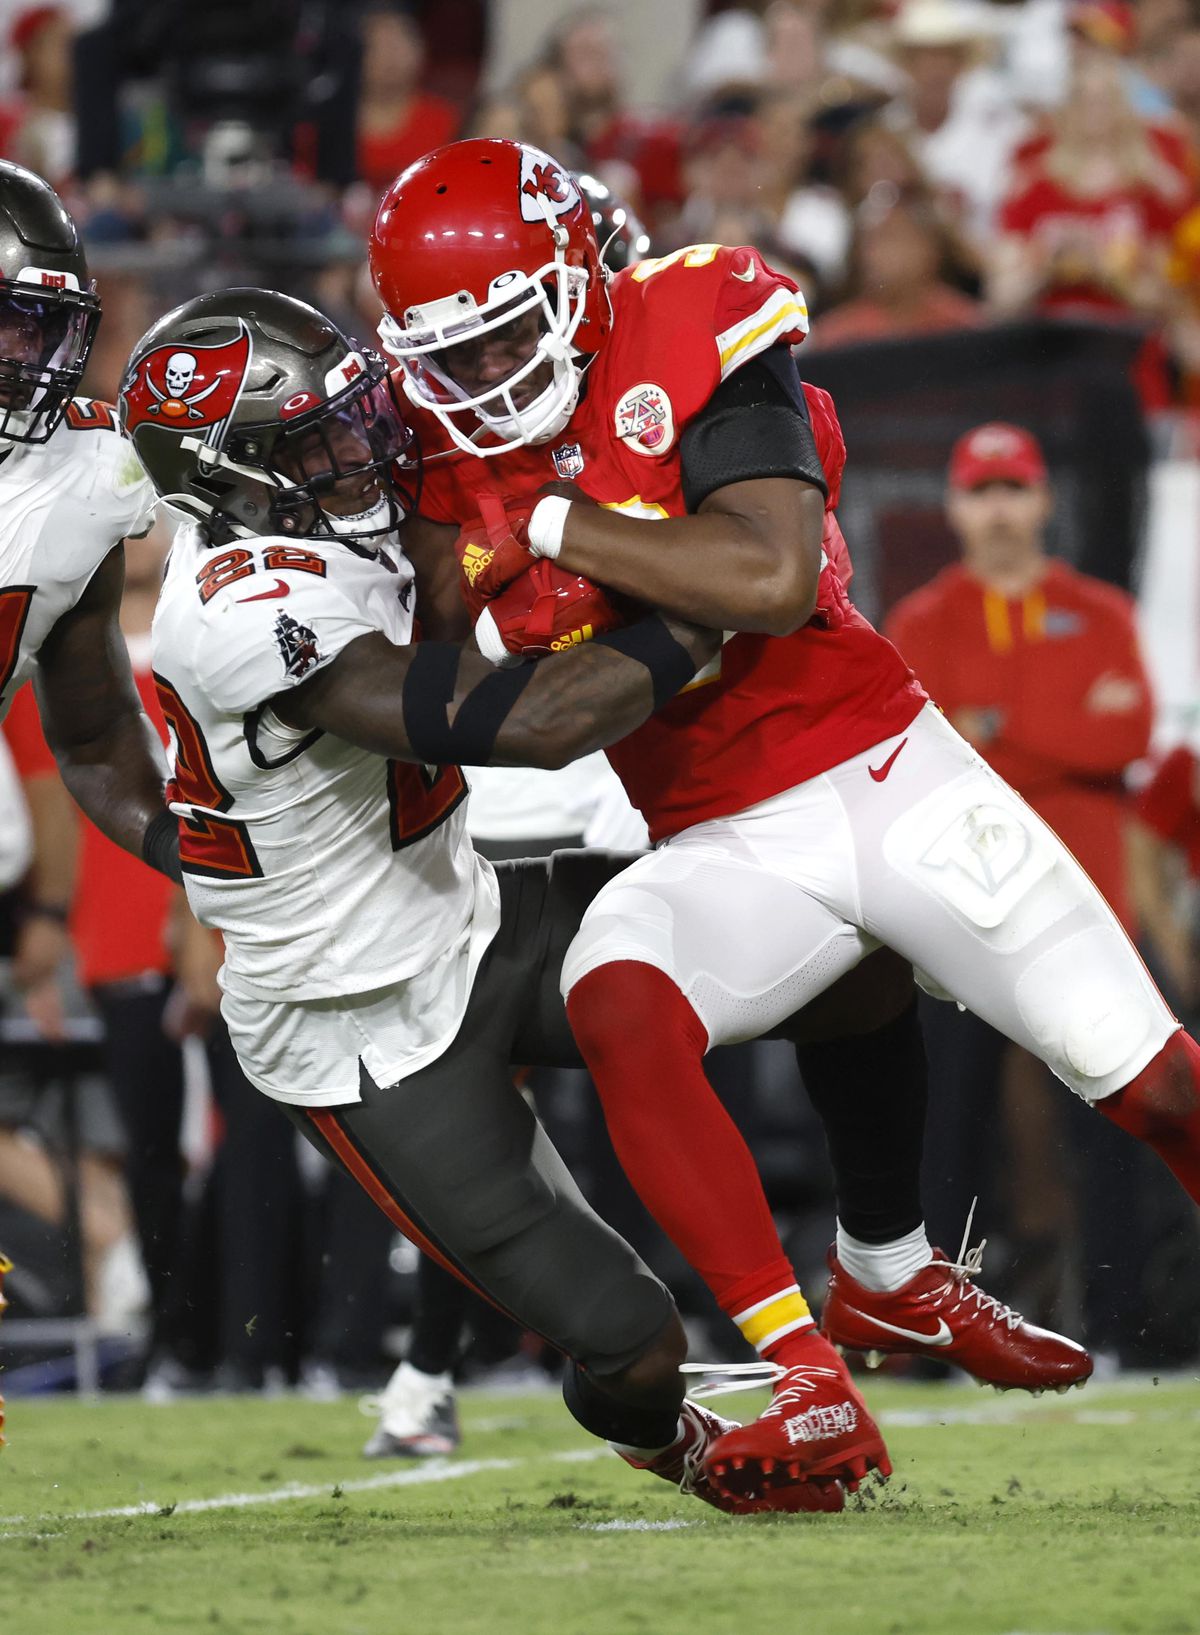 NFL: Kansas City Chiefs at Tampa Bay Buccaneers